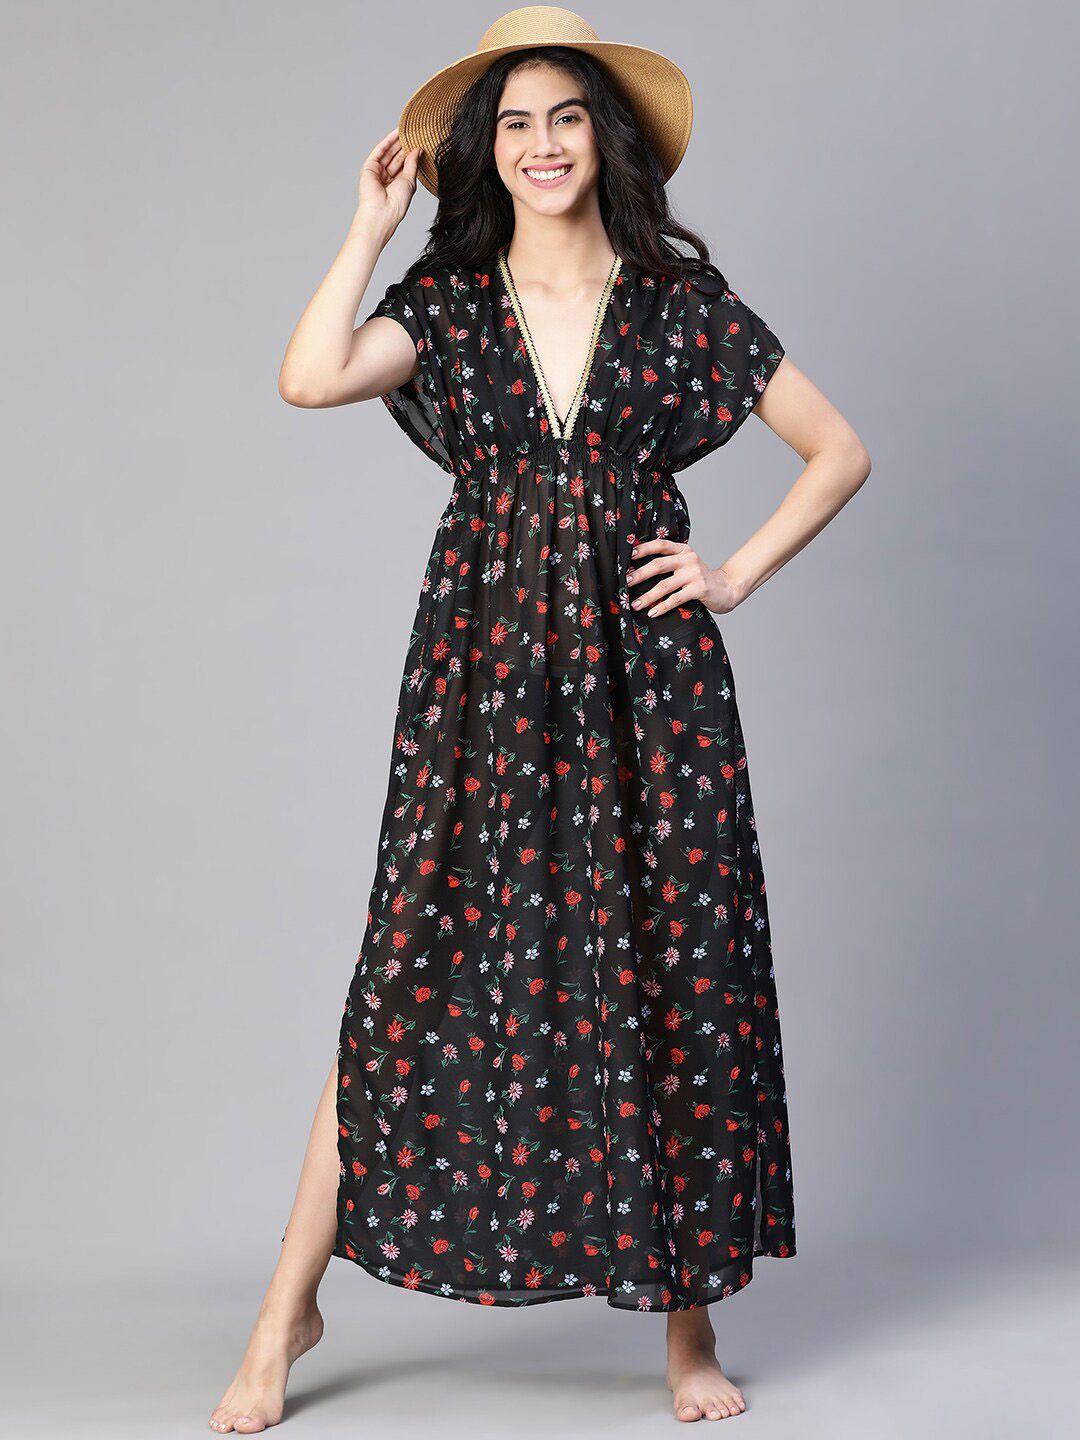 oxolloxo floral printed cotton cover-up dress